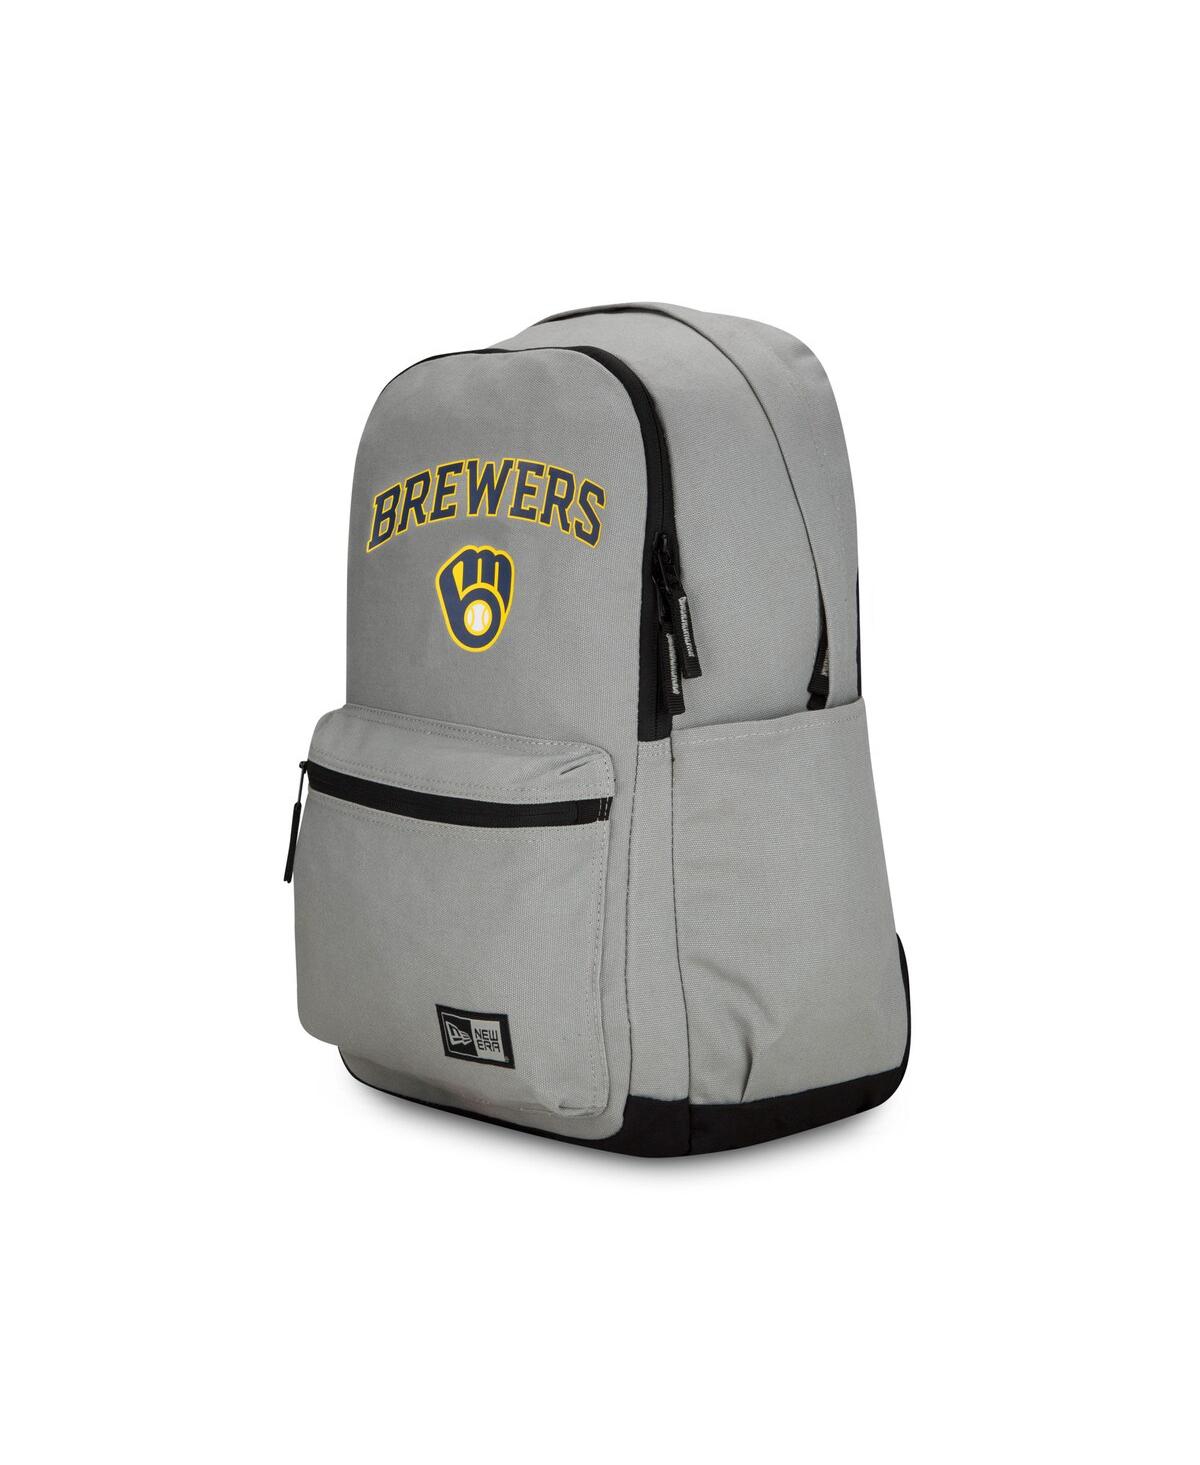 Men's and Women's New Era Milwaukee Brewers Throwback Backpack - Gray